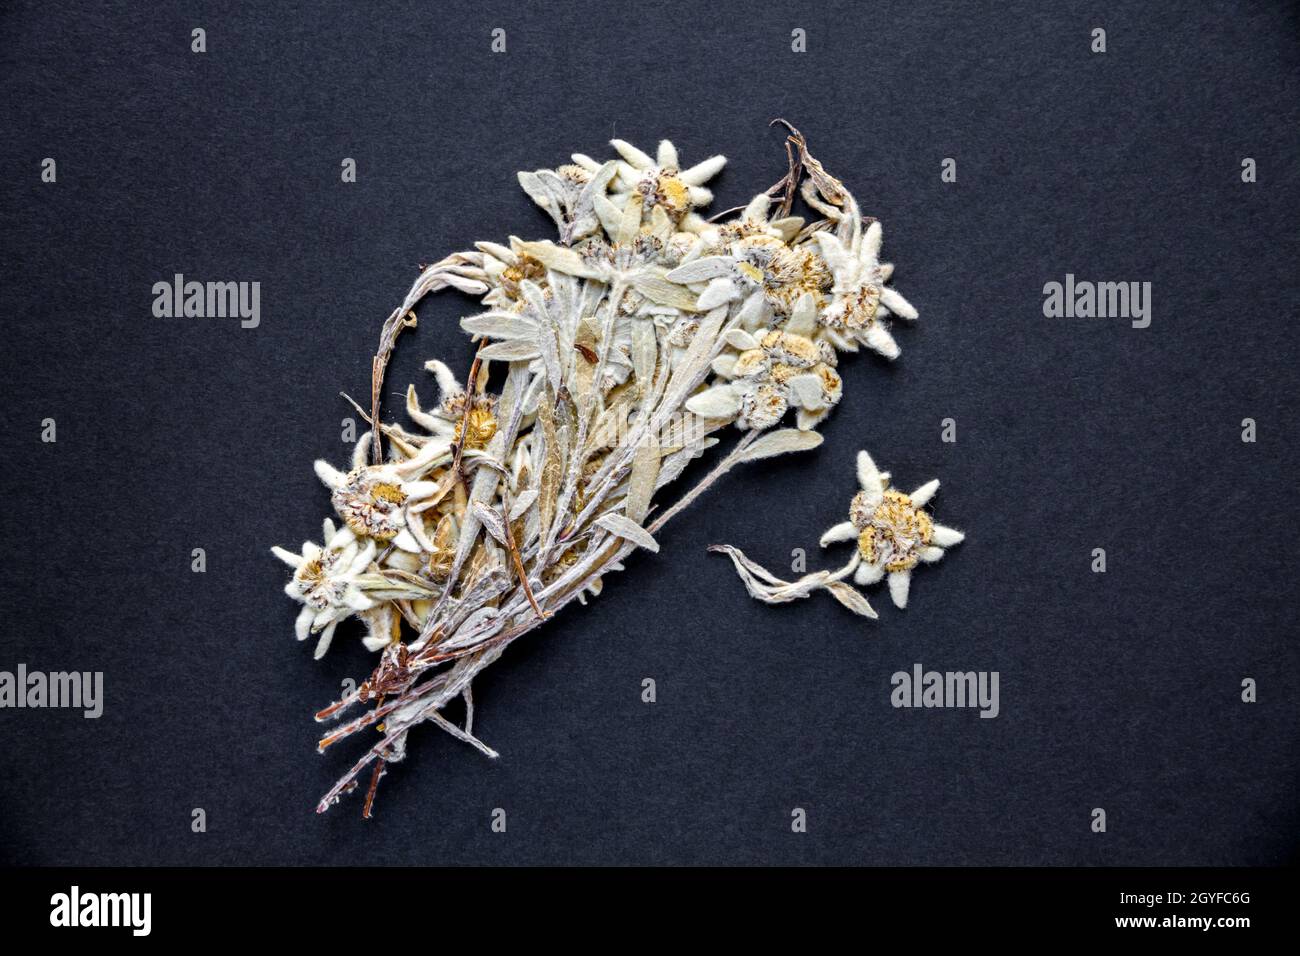 Dried Edelweiss flower isolated on black background. Stock Photo